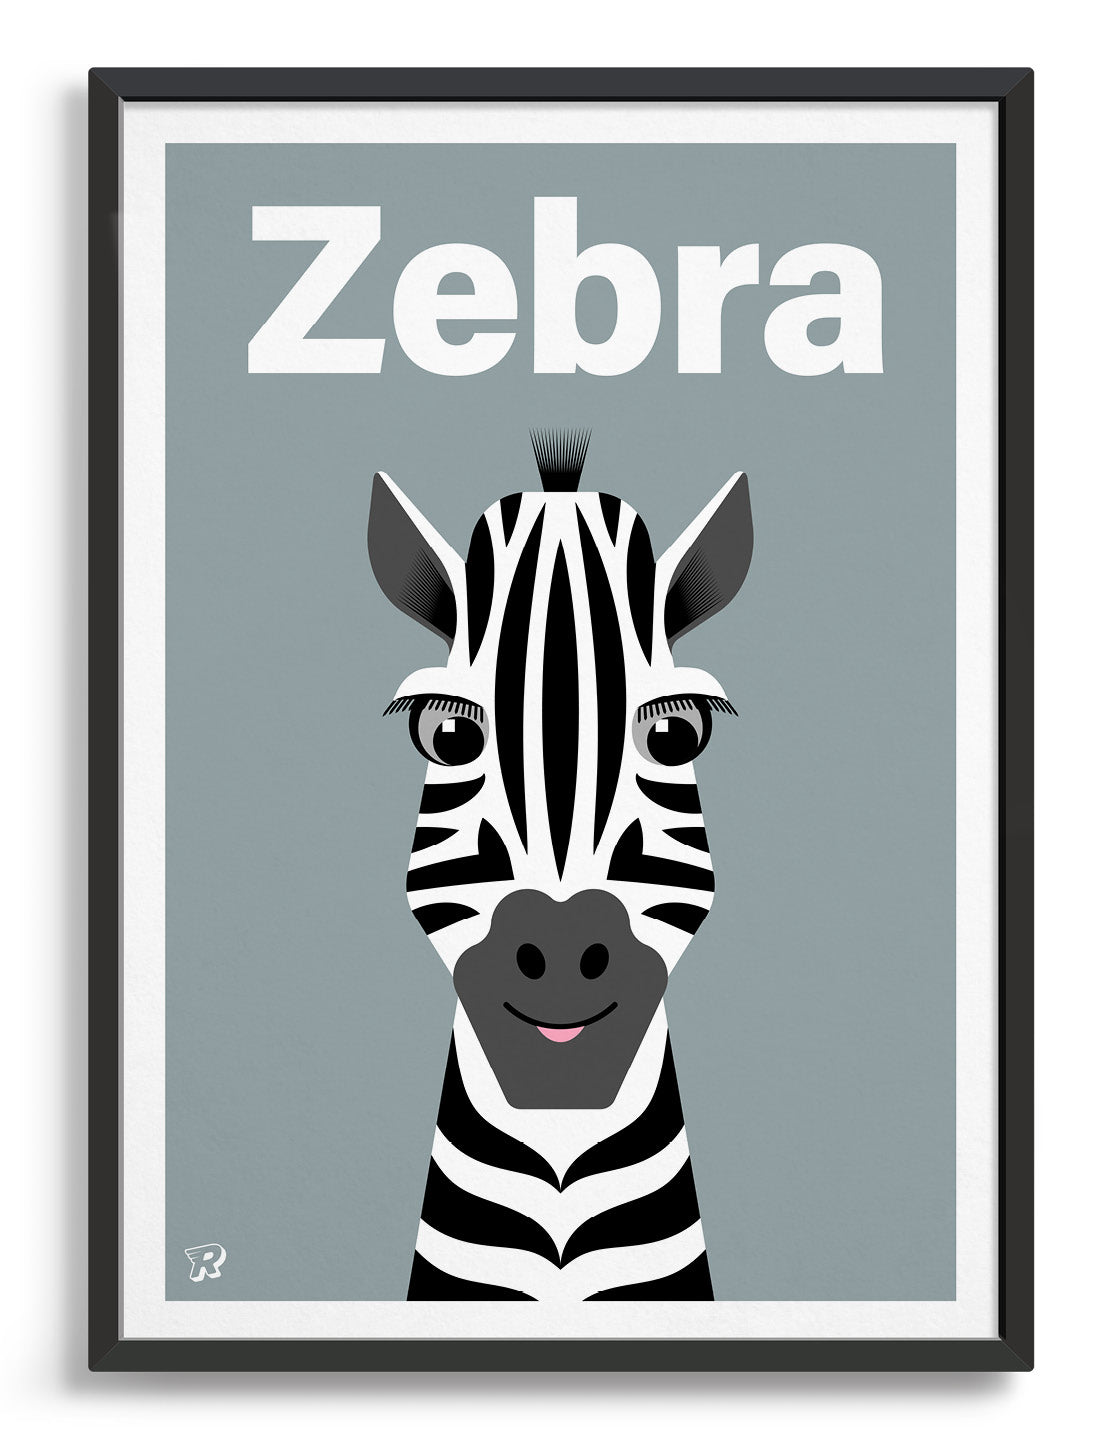 kids cute zebra art print with an illustration of a friendly zebra on a grey background. The word zebra is written along the top in a white font